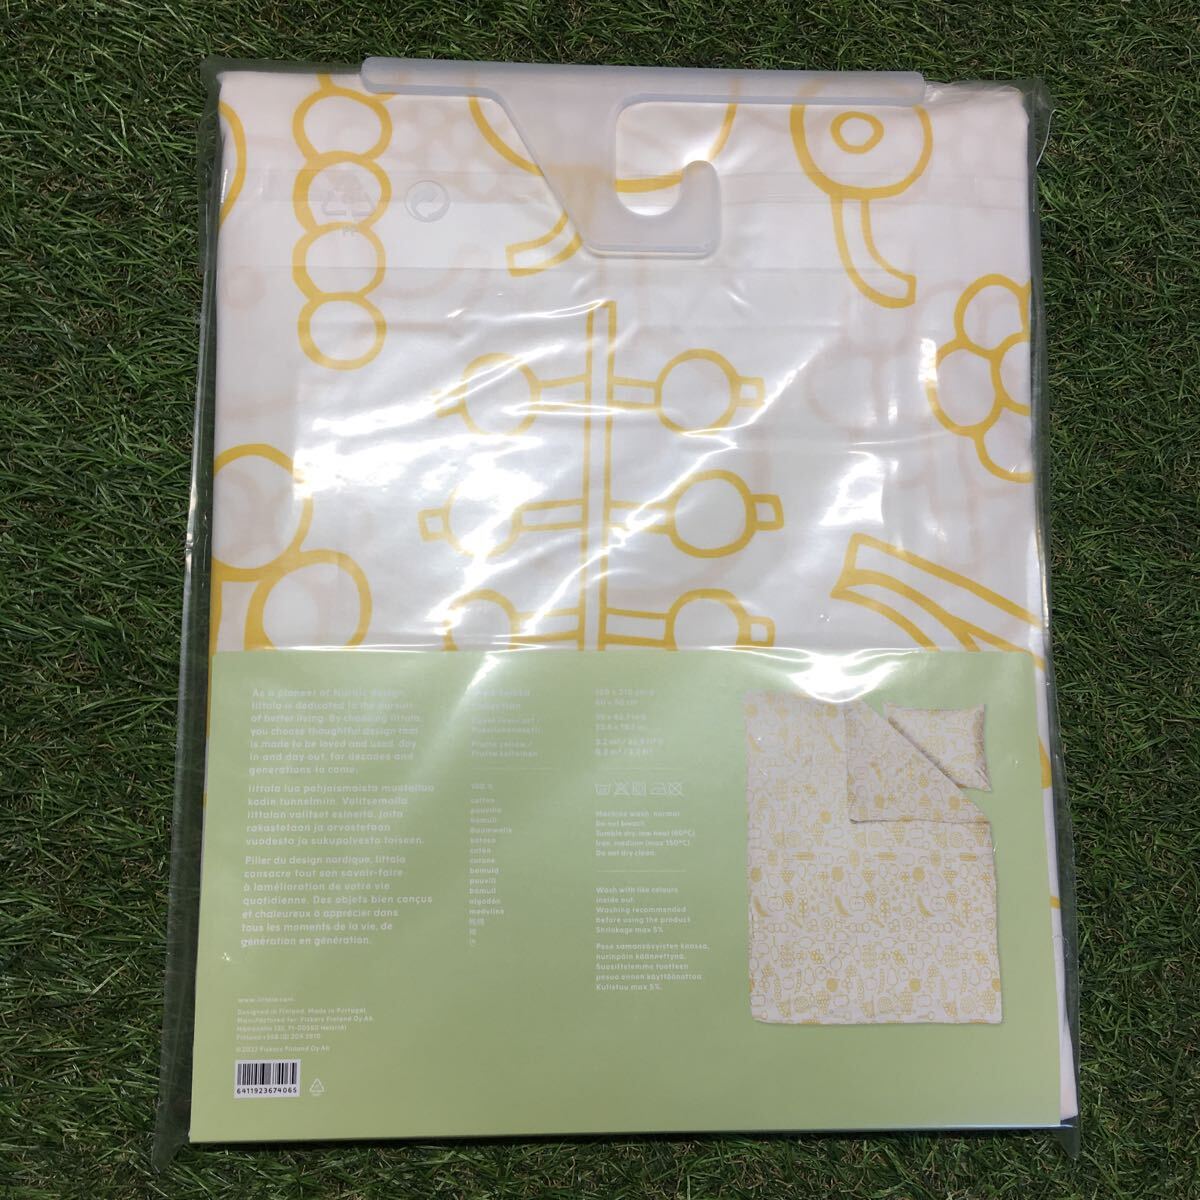 RX291-A56 iittala iittala bed cover OTC 367408 full ta150×210cm yellow color bed bedding sheet double miscellaneous goods unused storage goods bed 